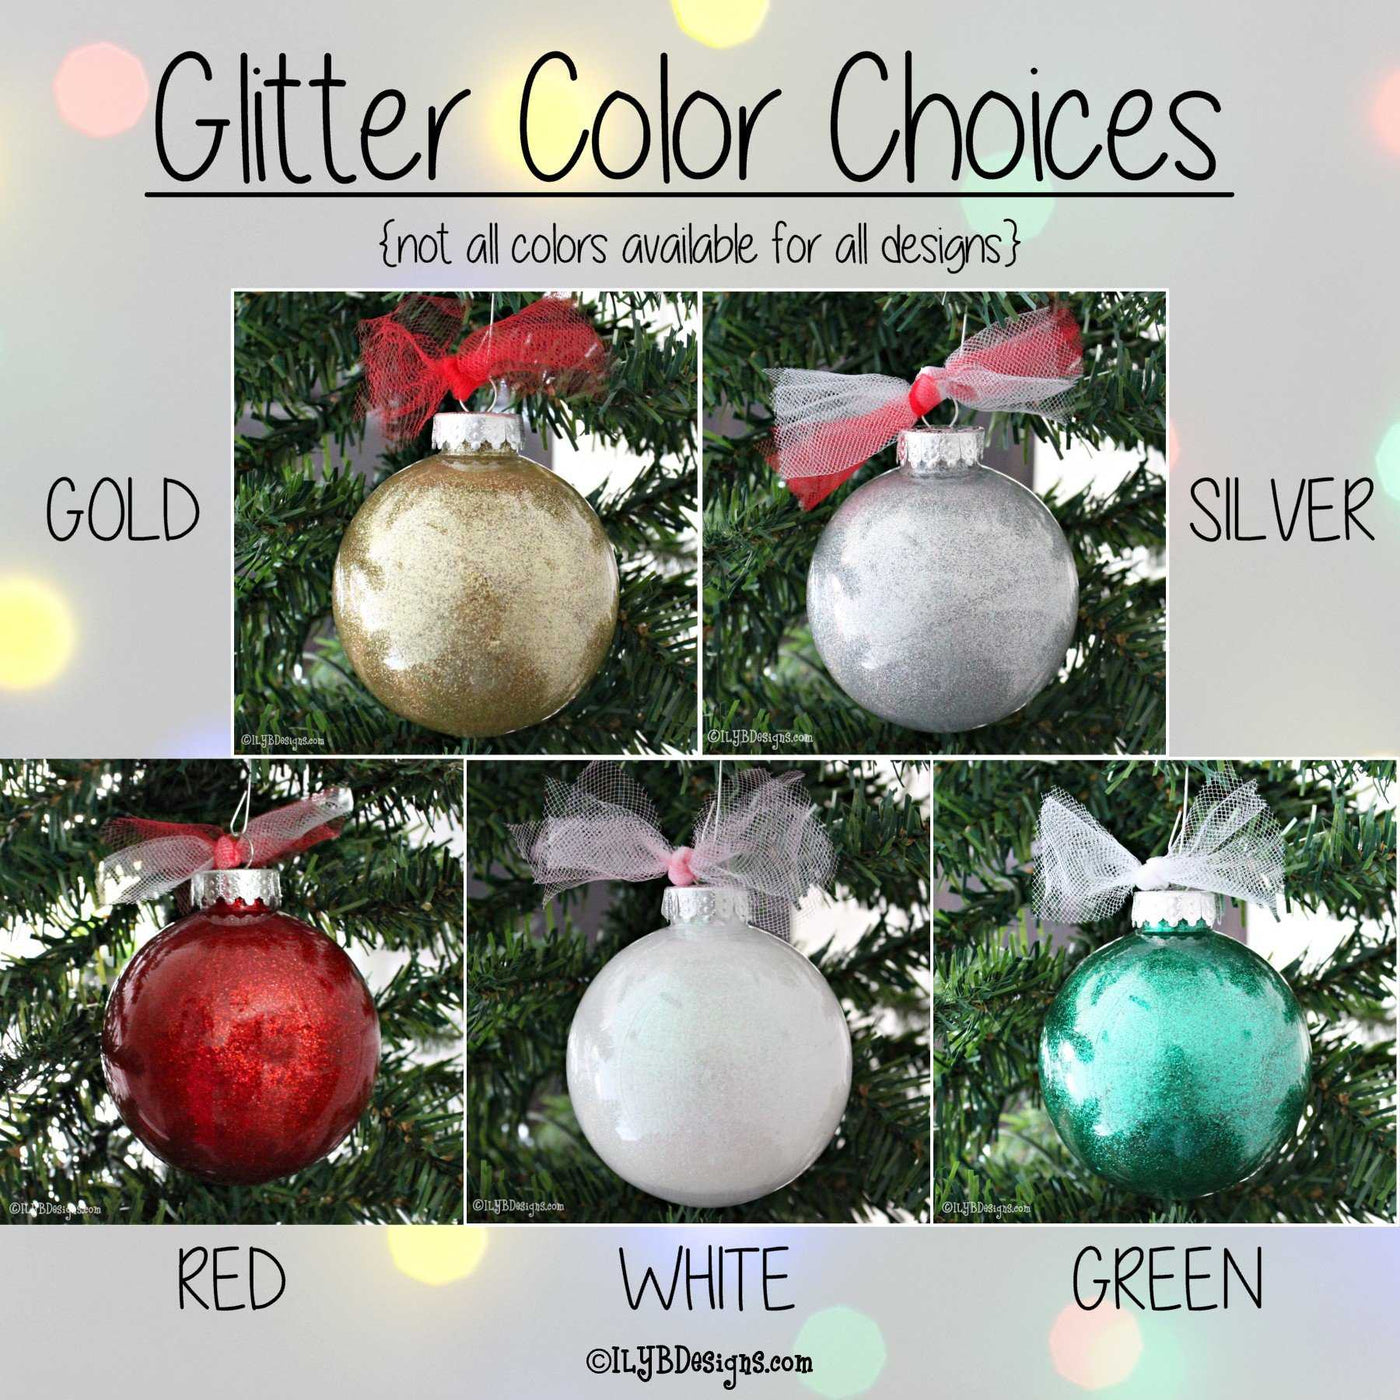 Baby's 1st Christmas Ornament | Personalized Glitter